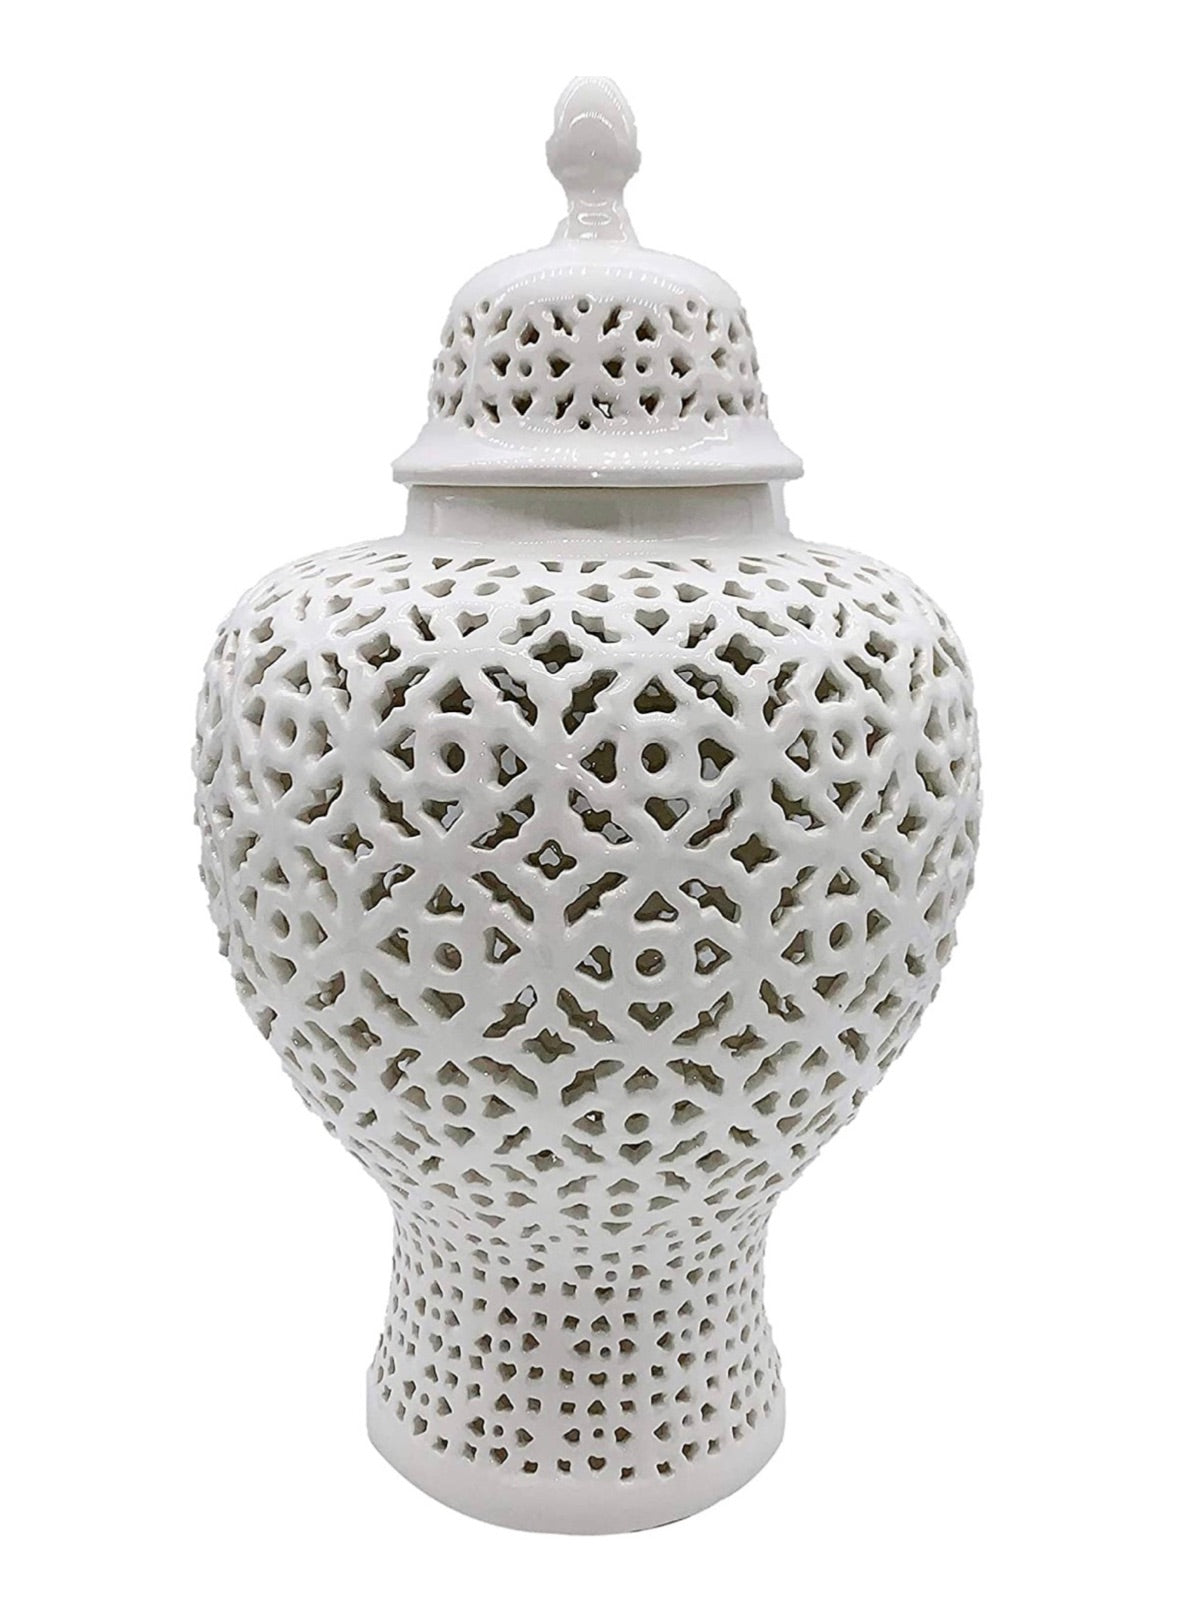 White Ceramic Ginger Jar with an elegant pierced design and lid in size Large